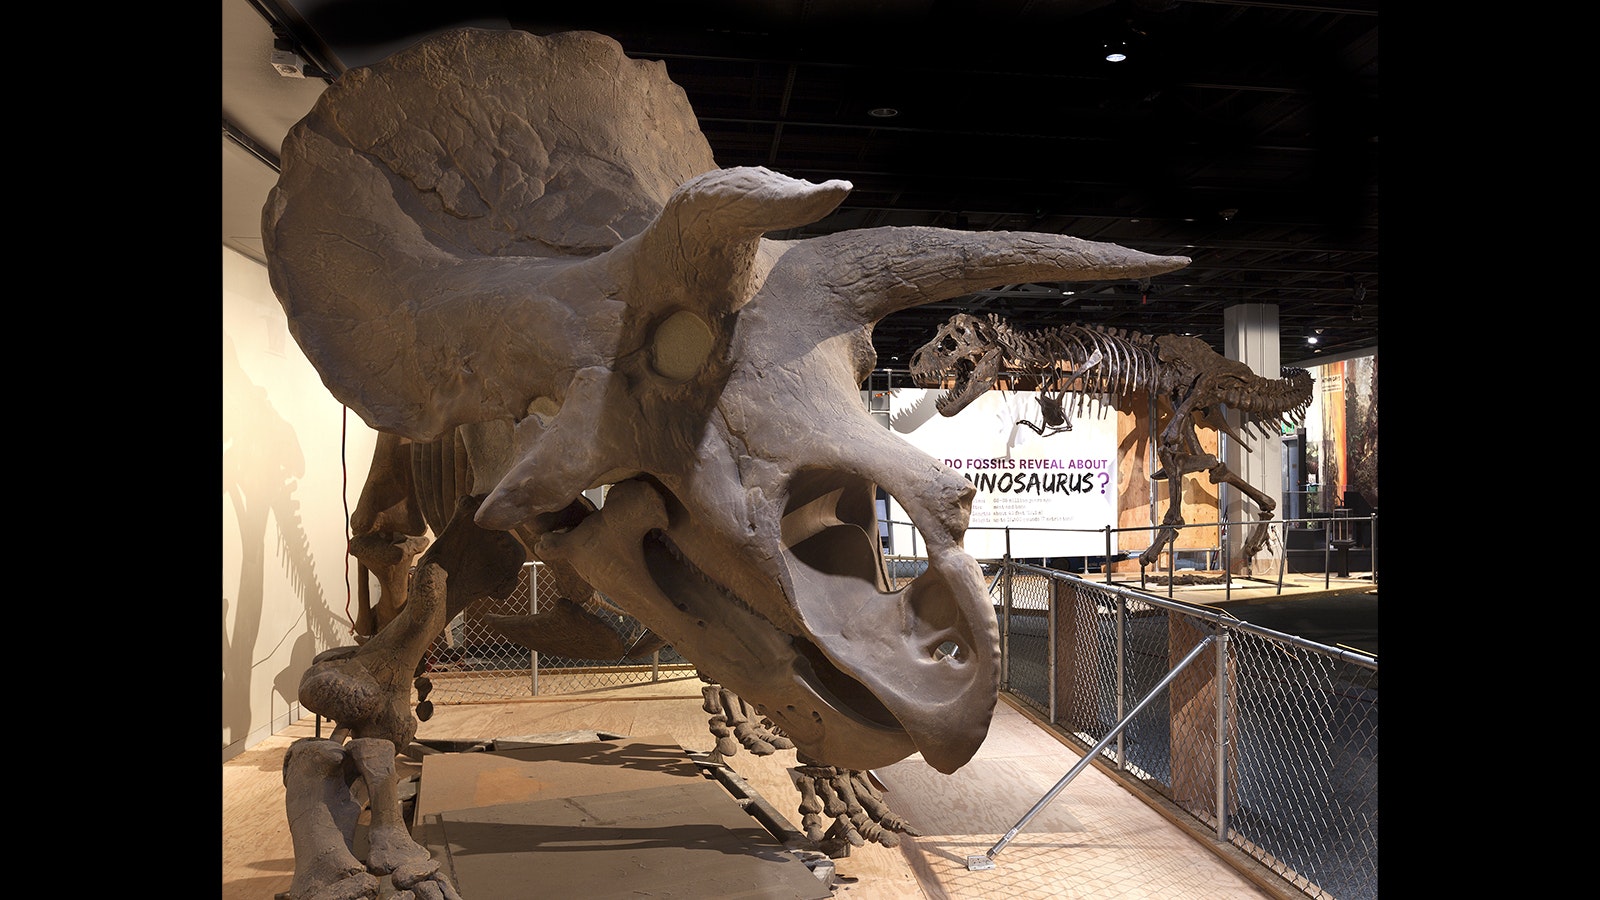 A replica of Hatcher, the first Triceratops skeleton ever mounted for display at the Smithsonian Institution in Washington, D.C. This specimen consists of 10 separate specimens found in Niobrara County.